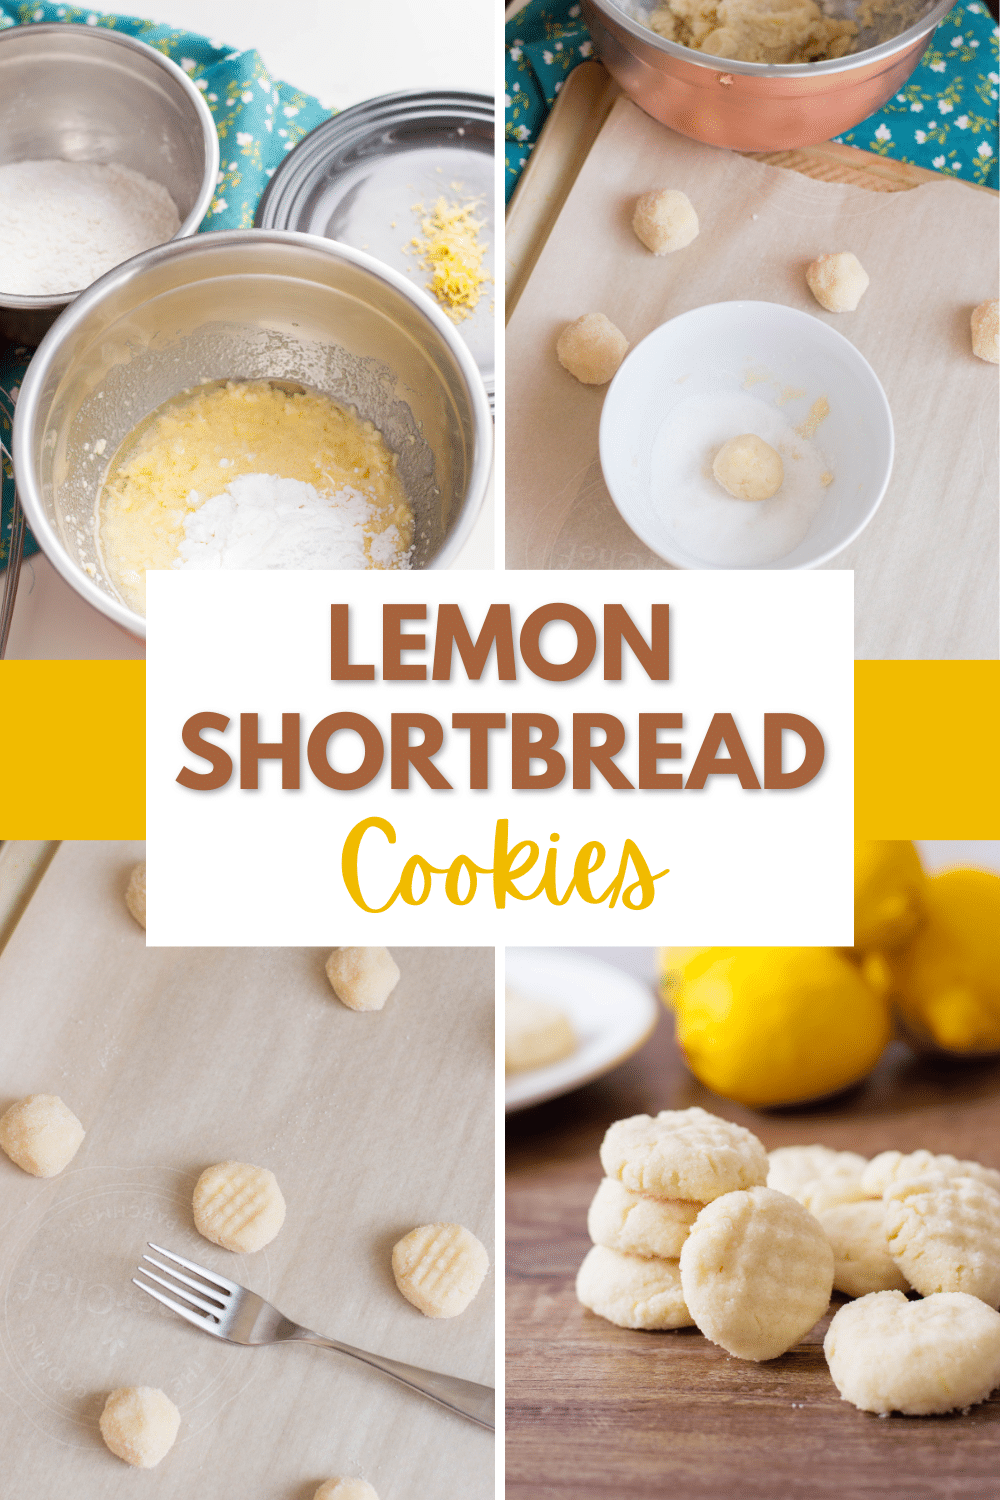 These Lemon Shortbread Cookies are a delightfully sweet treat. The buttery cookie dough is flavored with a hint of lemon with sugar. on top. #lemonshortbreadcookies #lemonshortbreadcookierecipe #cookierecipe #shortbreadcookiesrecipes #lemonflavor via @wondermomwannab